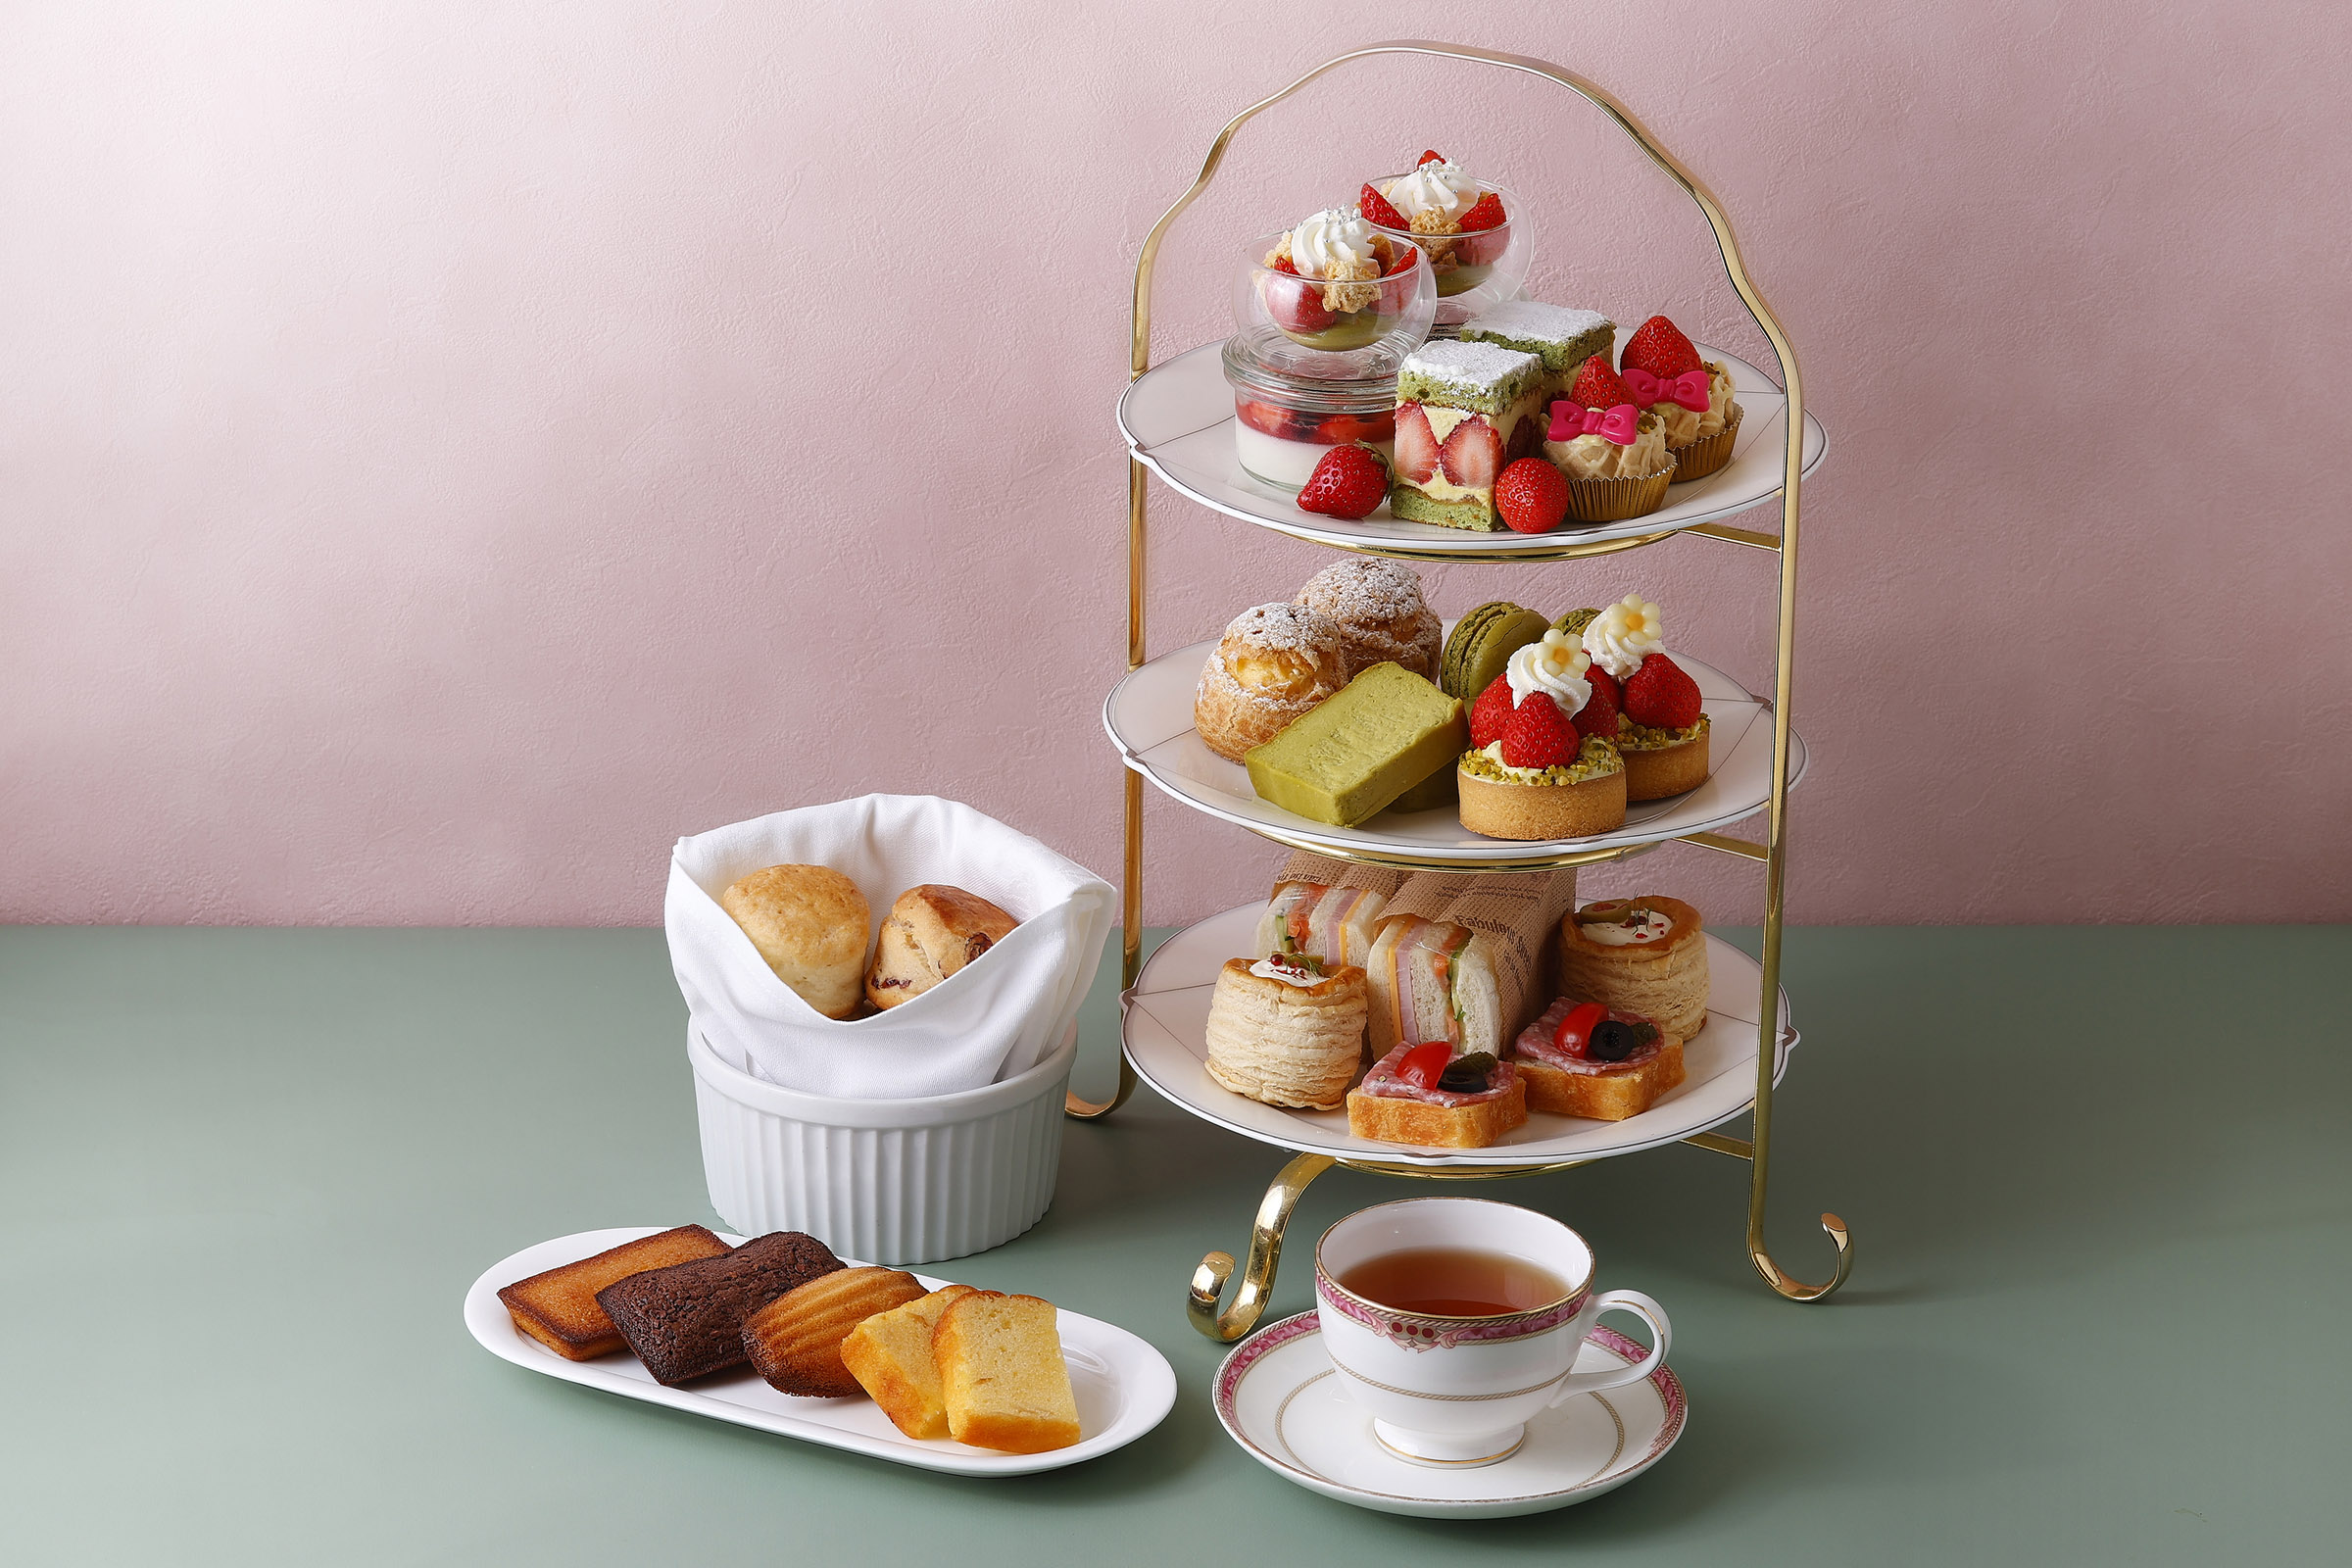 Strawberry and Pistachio Afternoon Tea